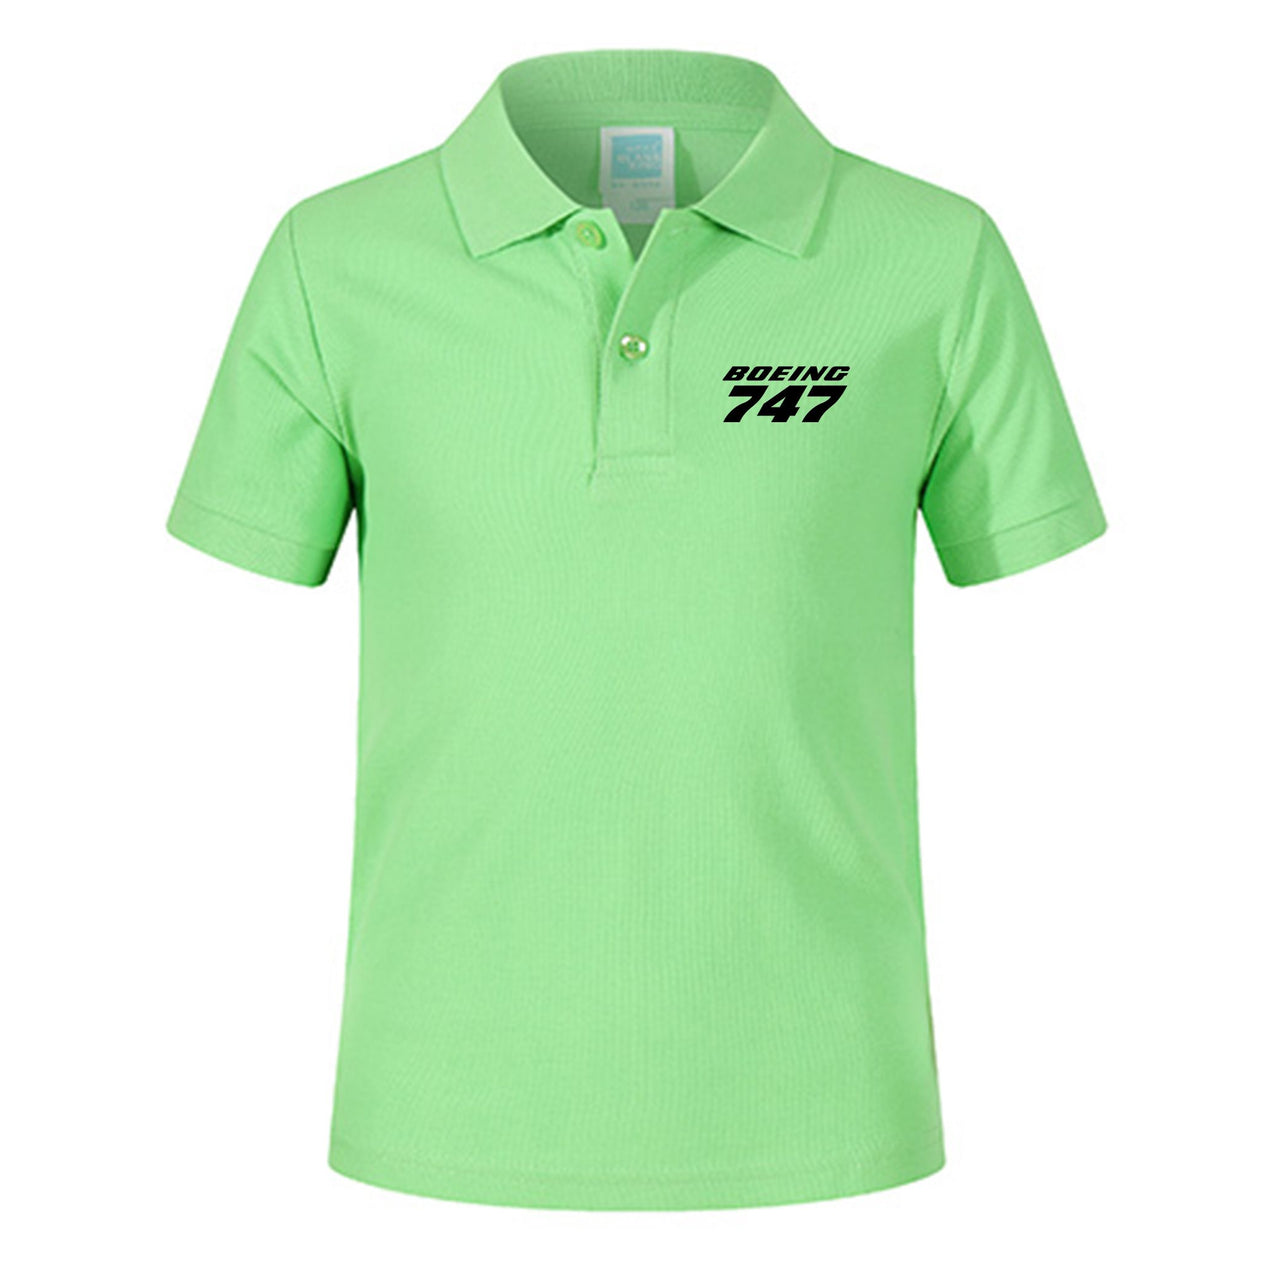 Boeing 747 & Text Designed Children Polo T-Shirts